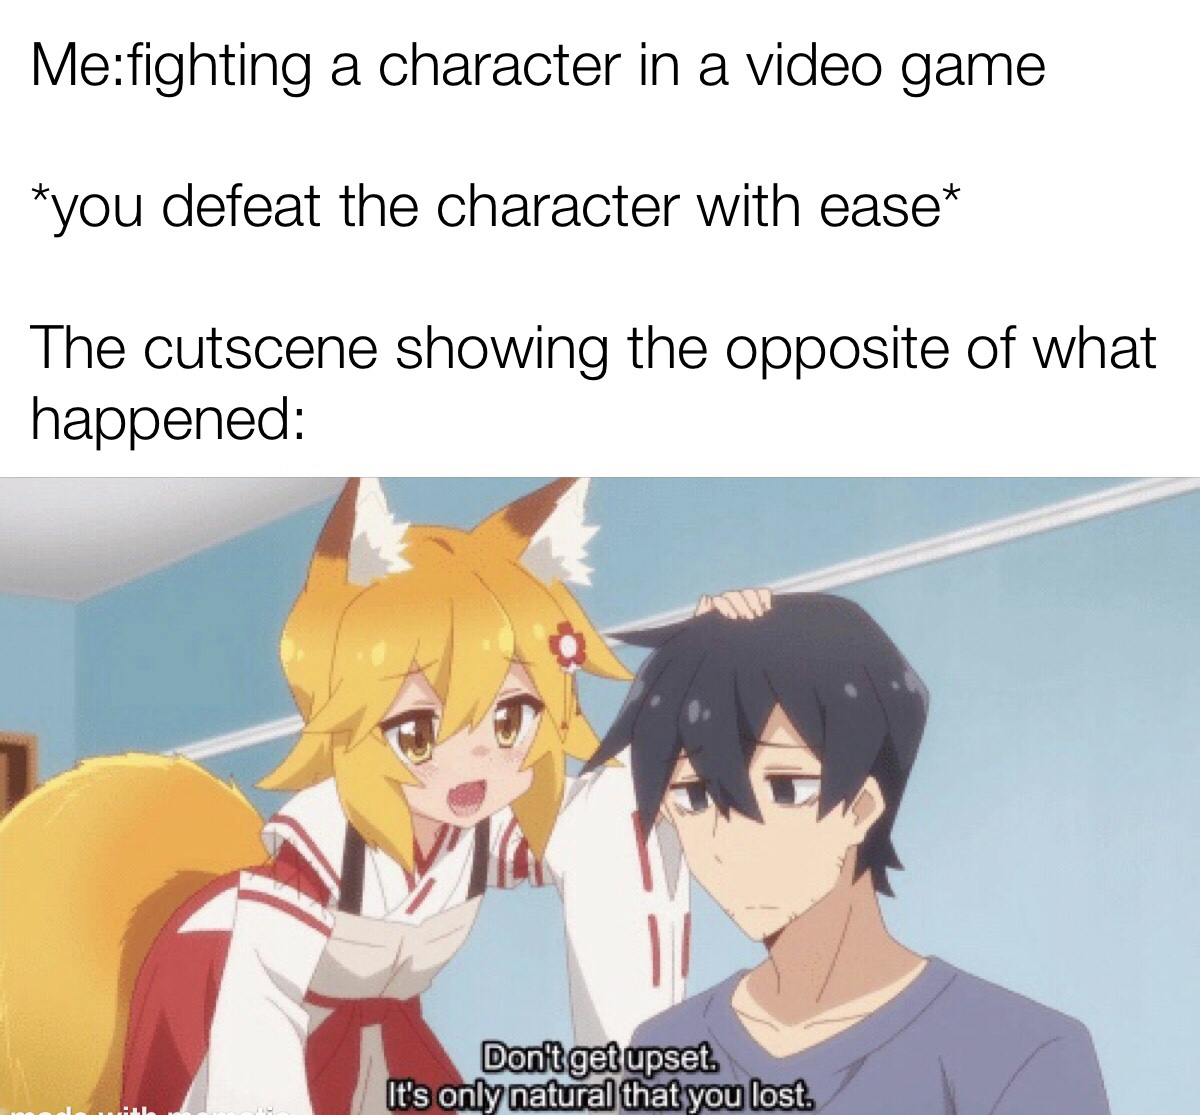 things gamers hate - Mefighting a character in a video game you defeat the character with ease The cutscene showing the opposite of what happened Don't get upset. It's only natural that you lost.